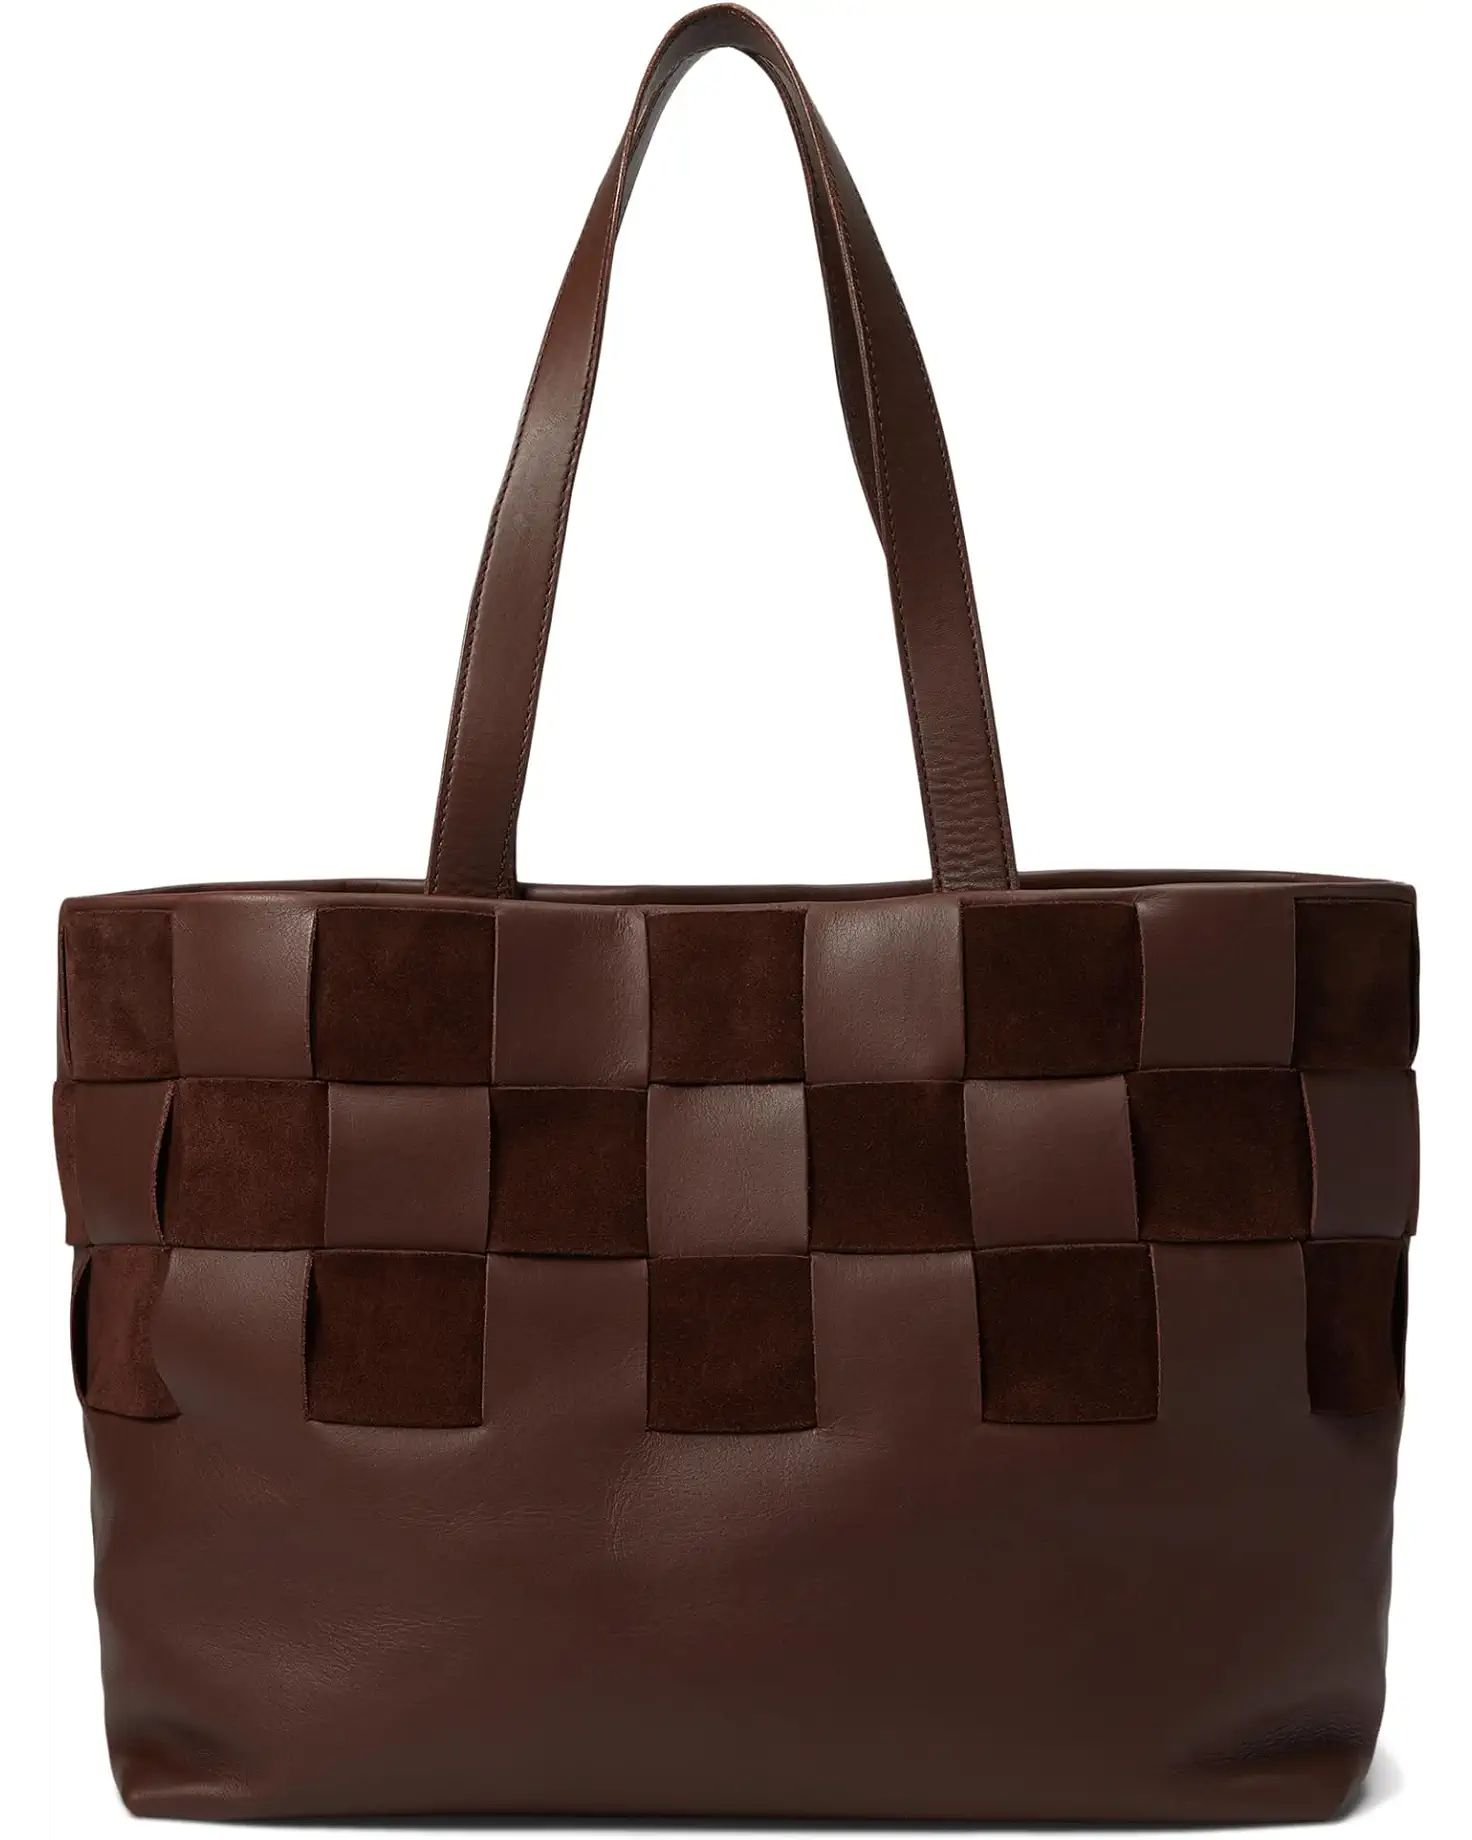 Madewell The Basketweave Tote in Leather and Suede | Zappos